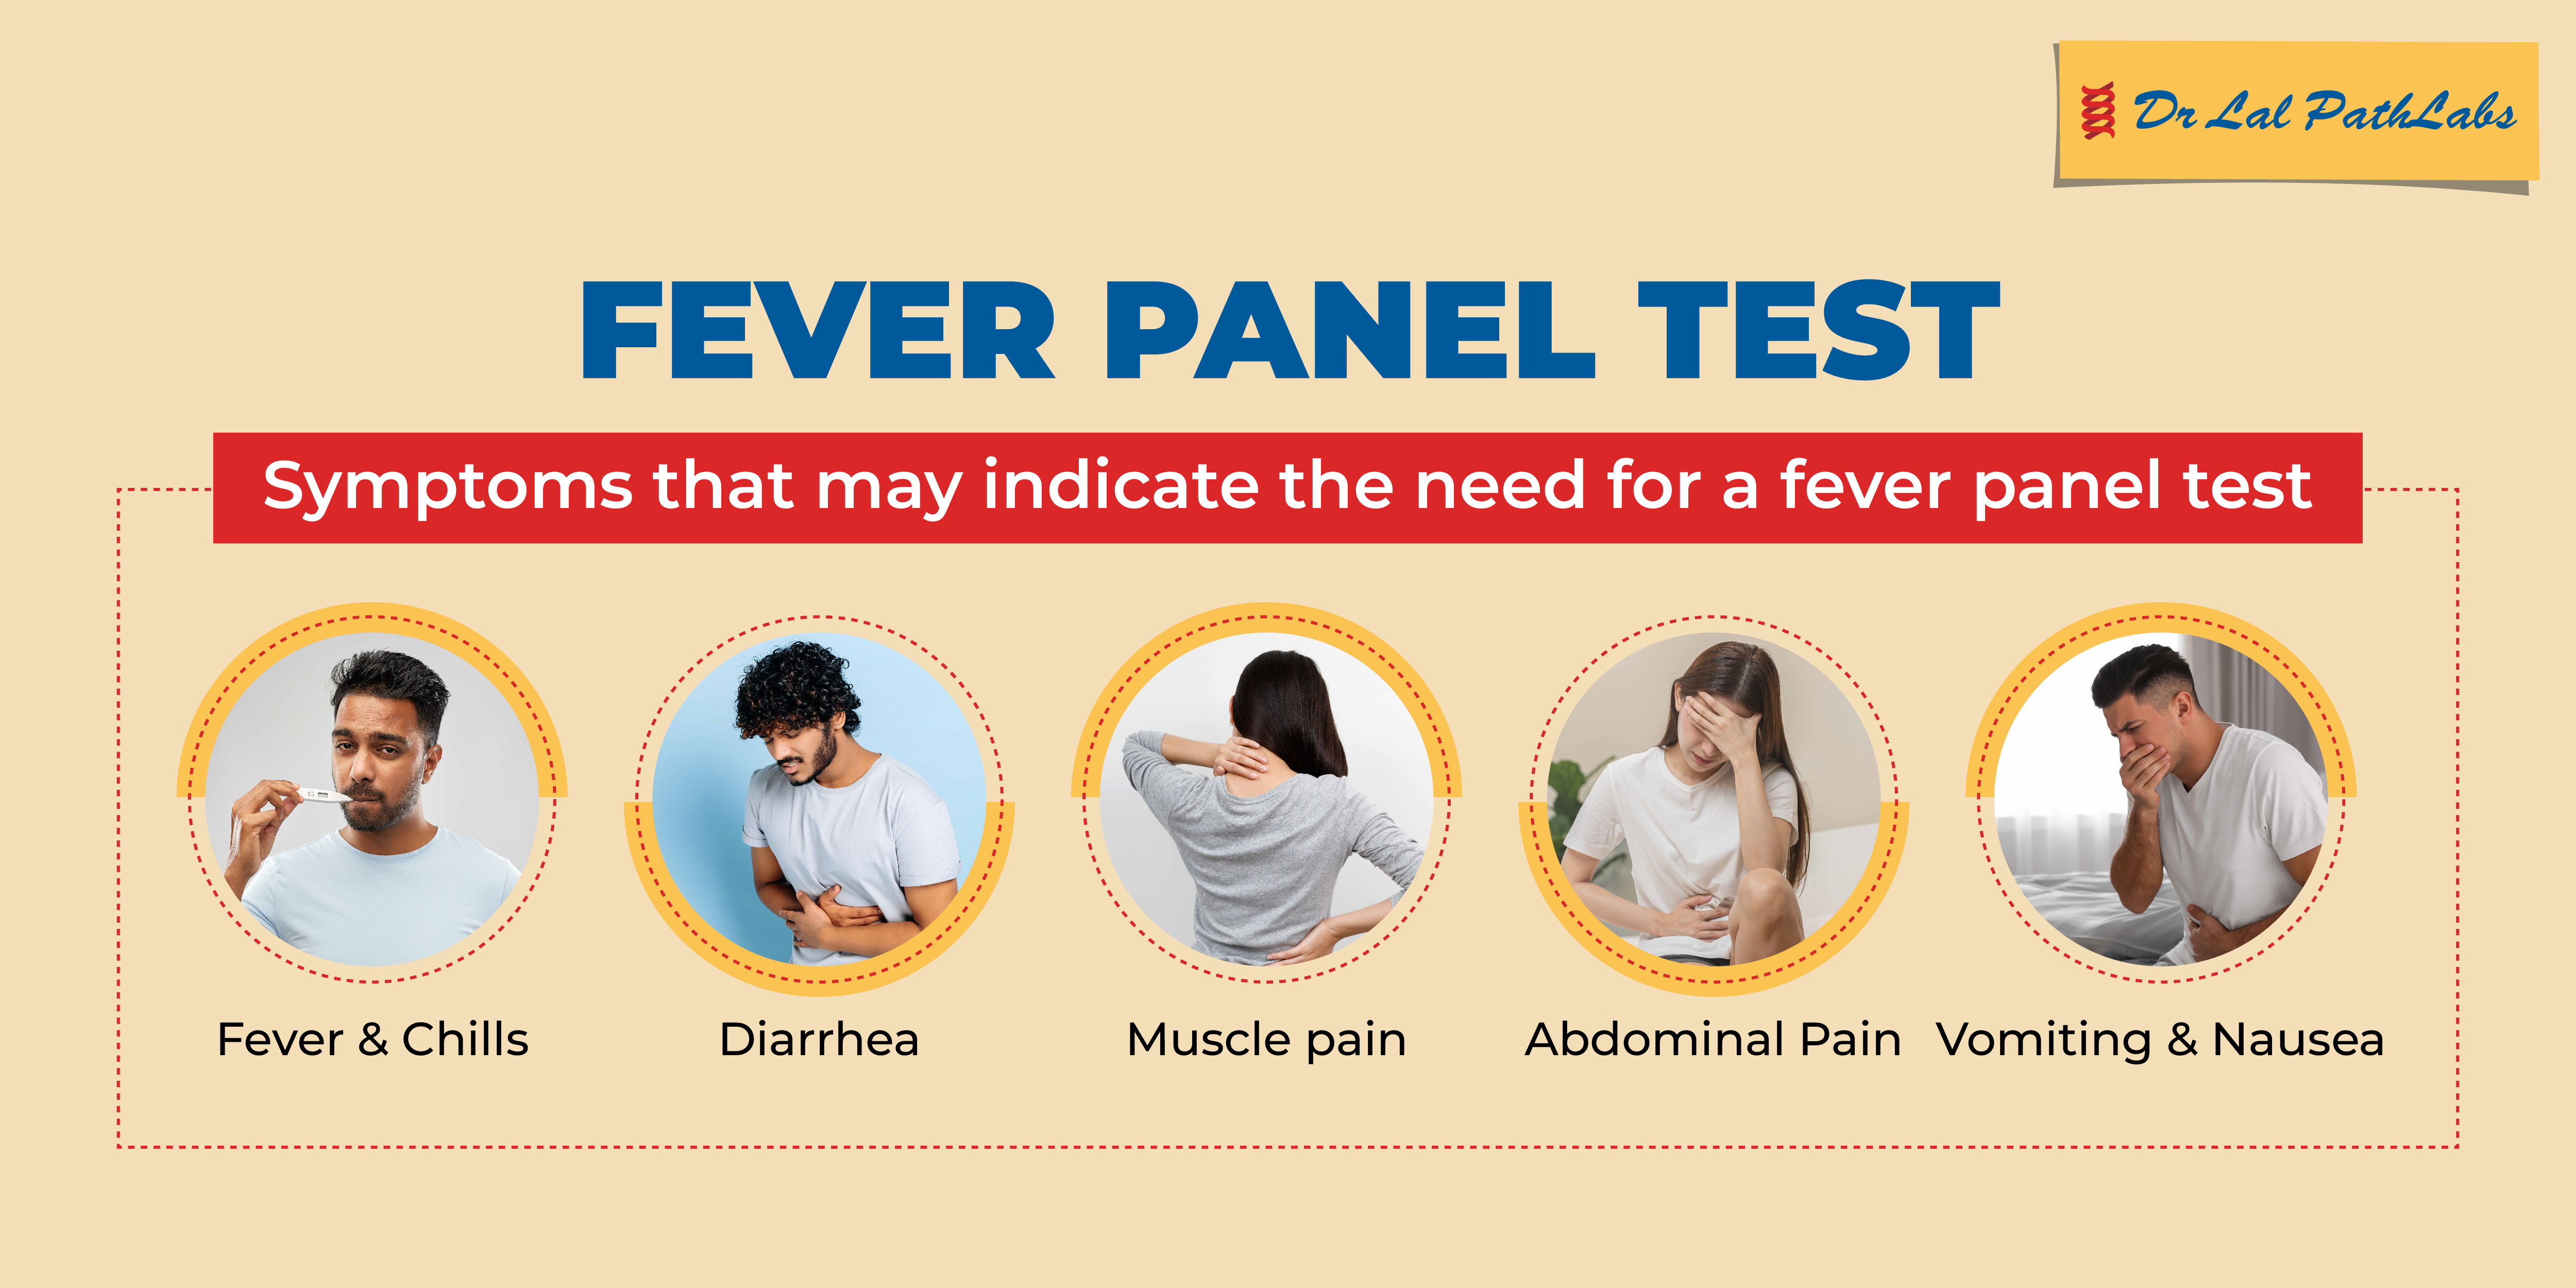 Doctors recommend a fever panel test to identify infectious agents and pinpoint the cause of fever and related symptoms